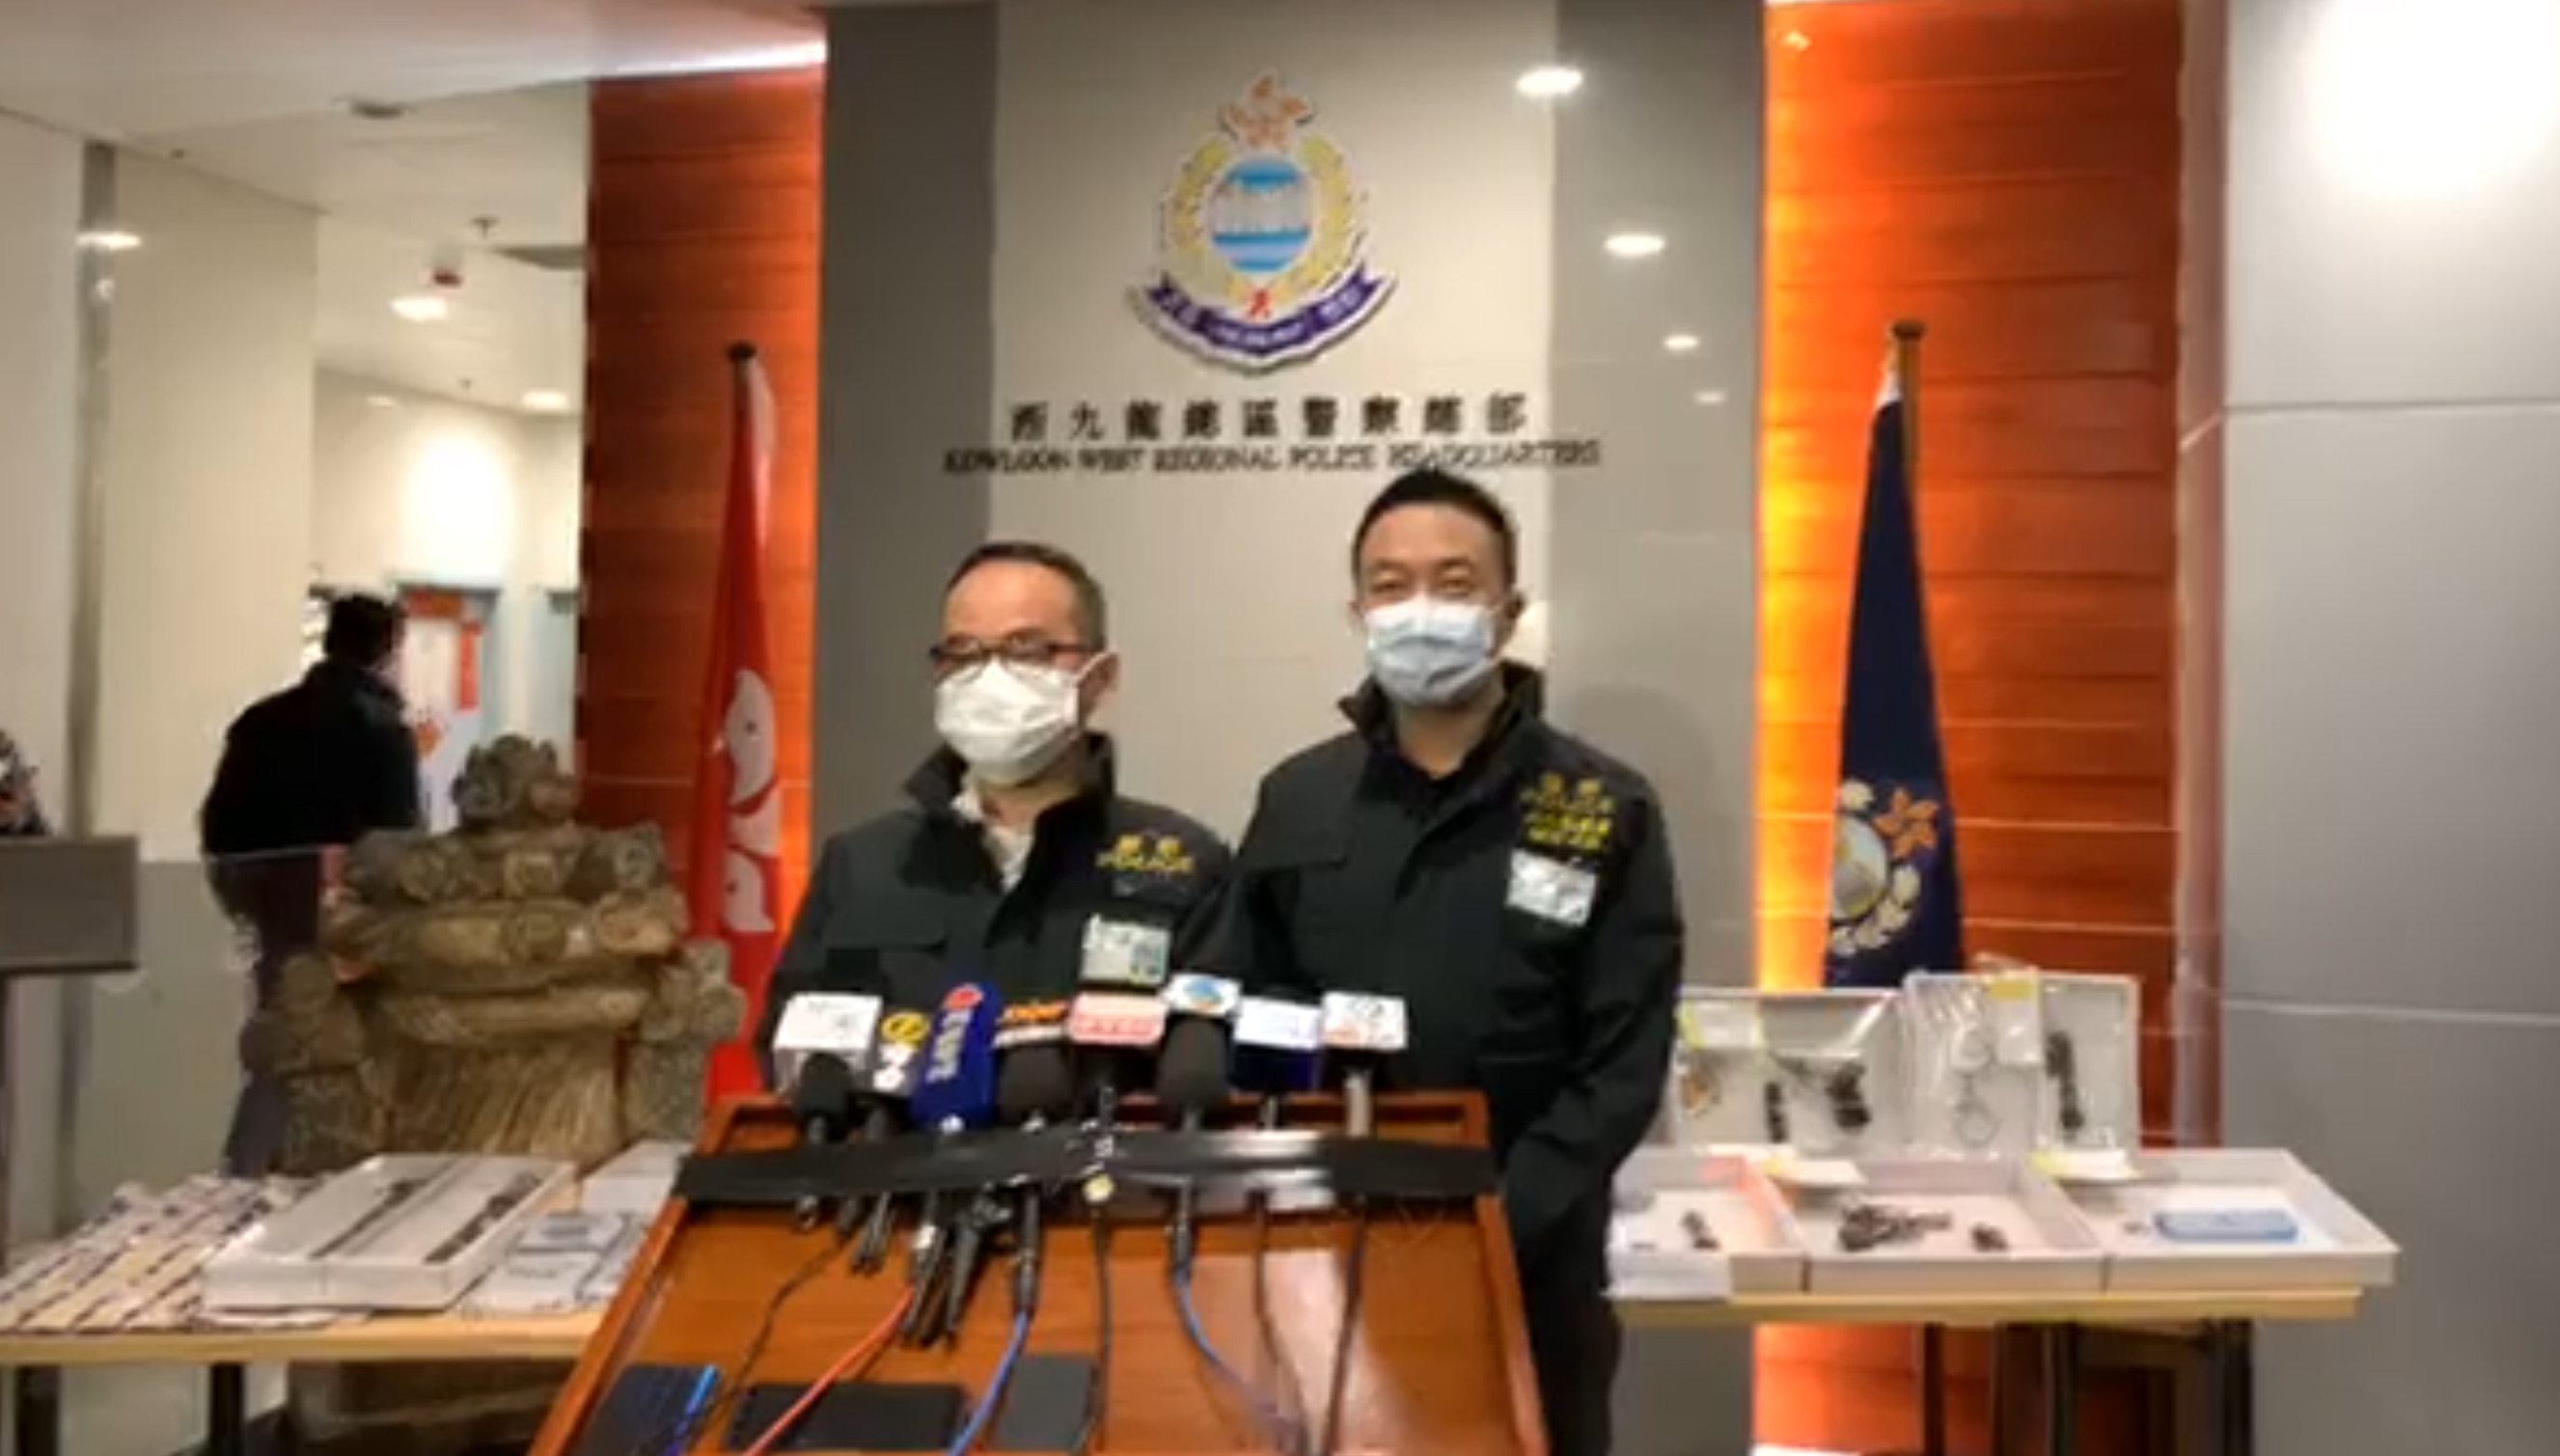 Police brief the press on Tuesday on the arrest of a man accused of possessing three firearms and more than four kilos of hard drugs. Screengrab via Facebook.